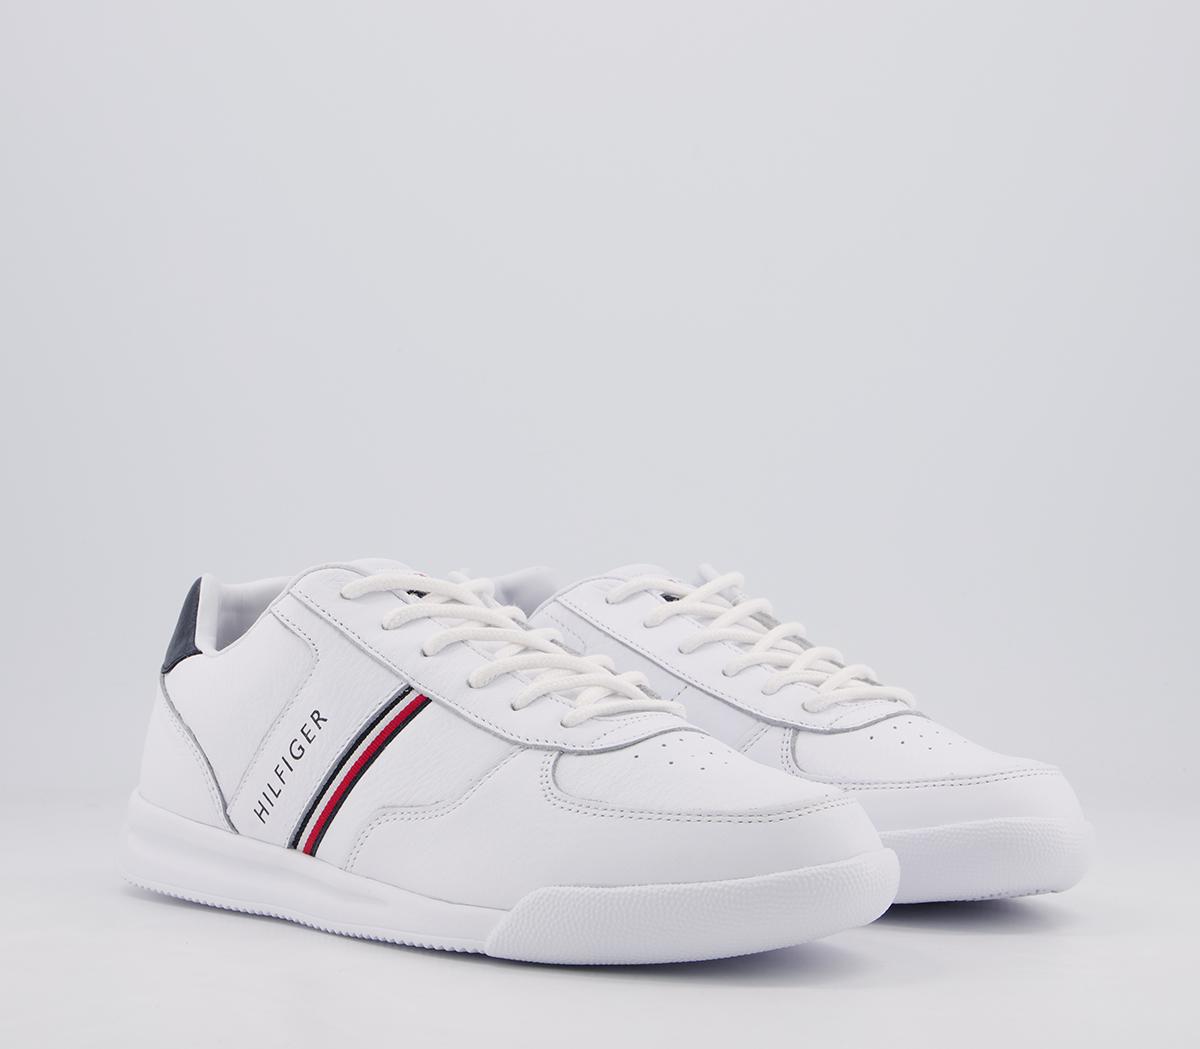 Tommy Hilfiger Lightweight Sneakers White Red Blue - His trainers